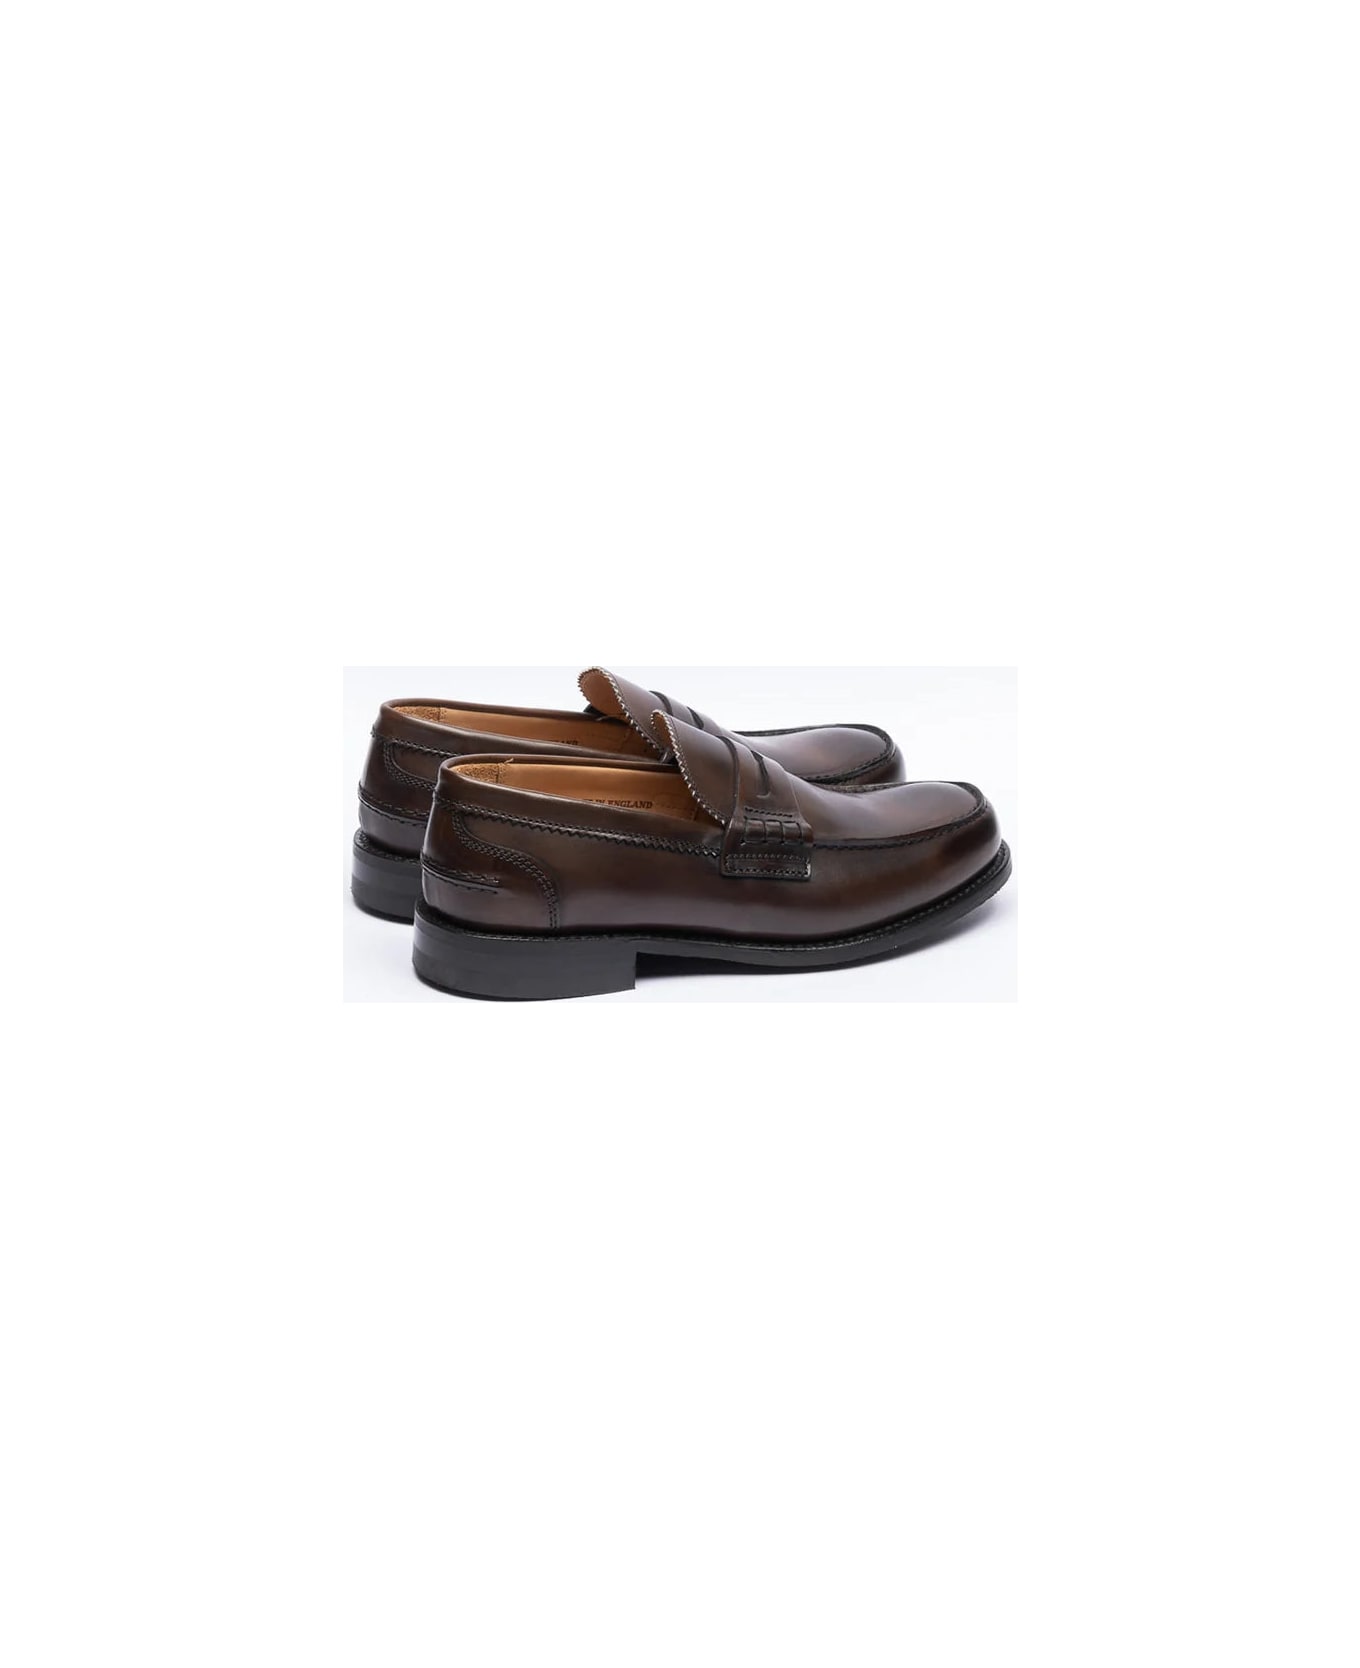 Cheaney Dorking Ii Loafer Brown Leather - MOCHA